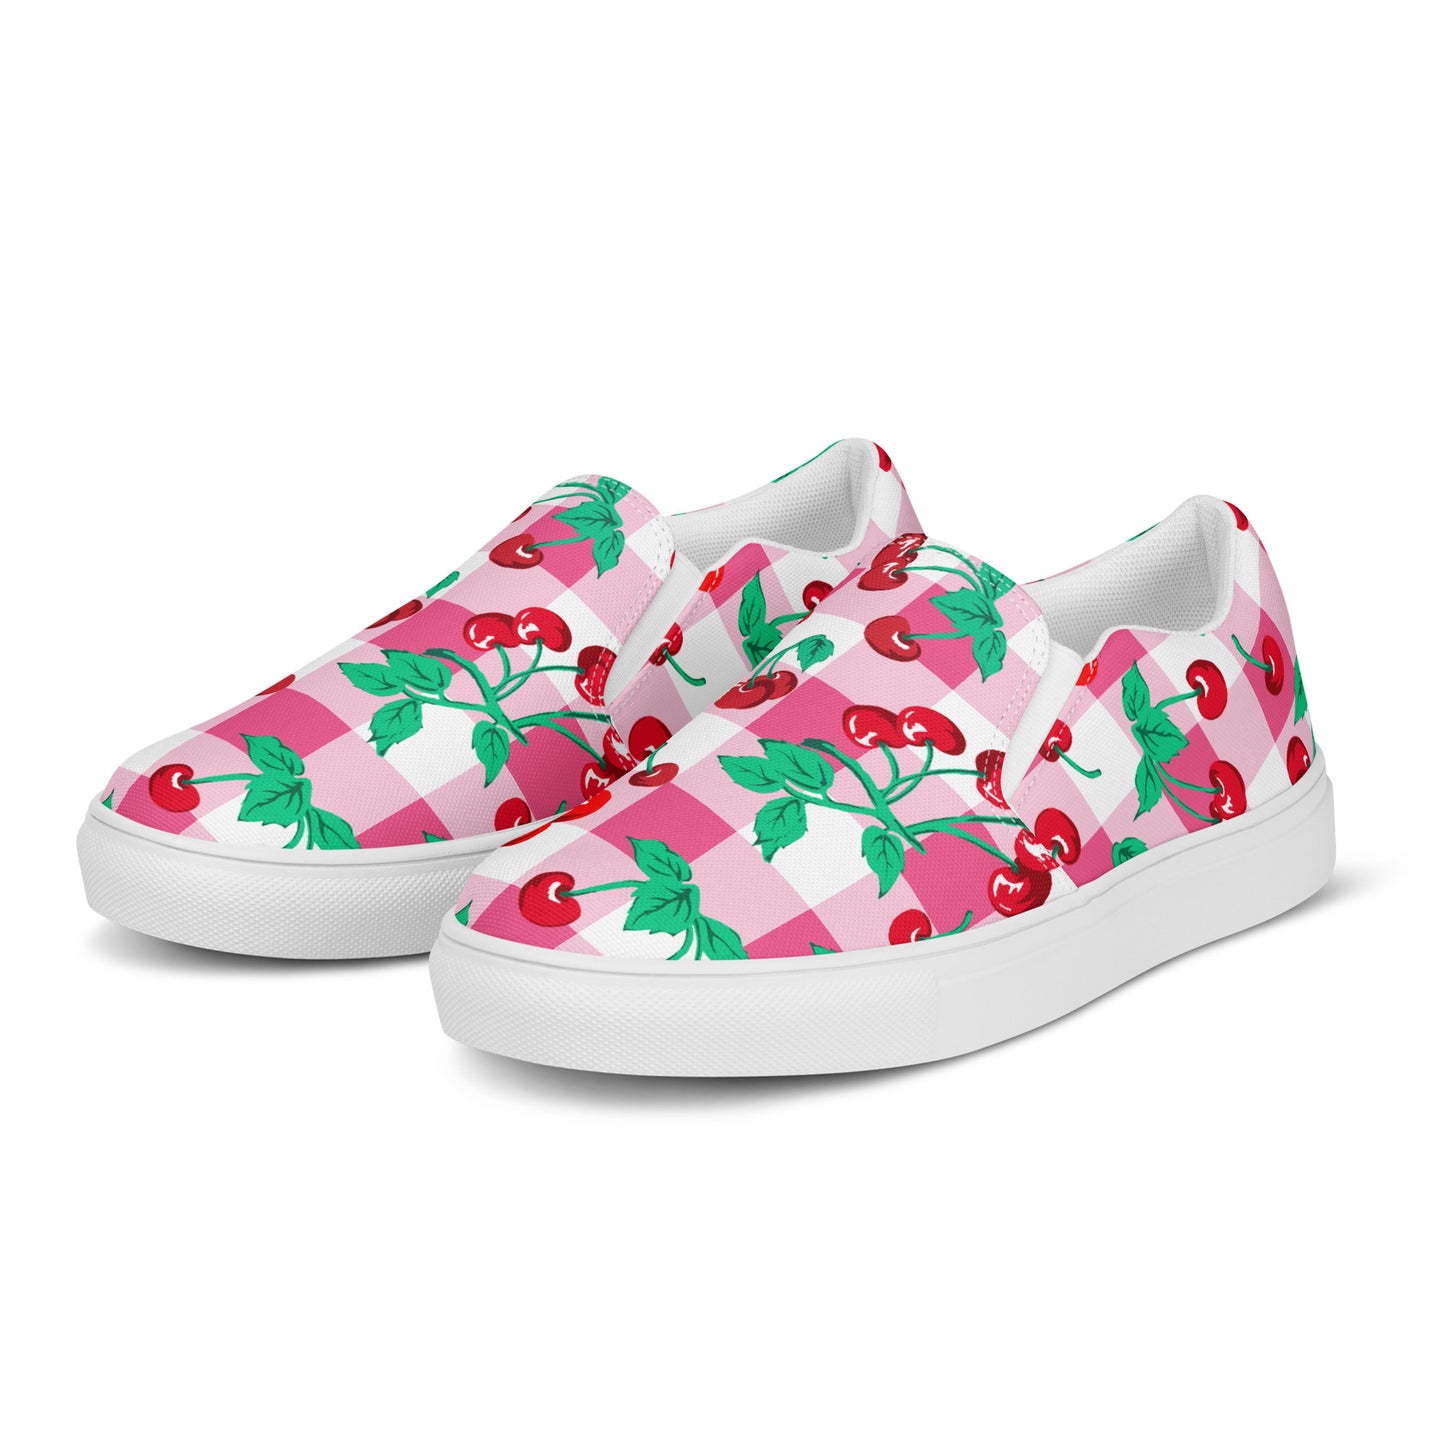 Pink Gingham Cherry Girl Women’s Canvas Slip-on Deck Shoes | Pinup Couture Relaxed